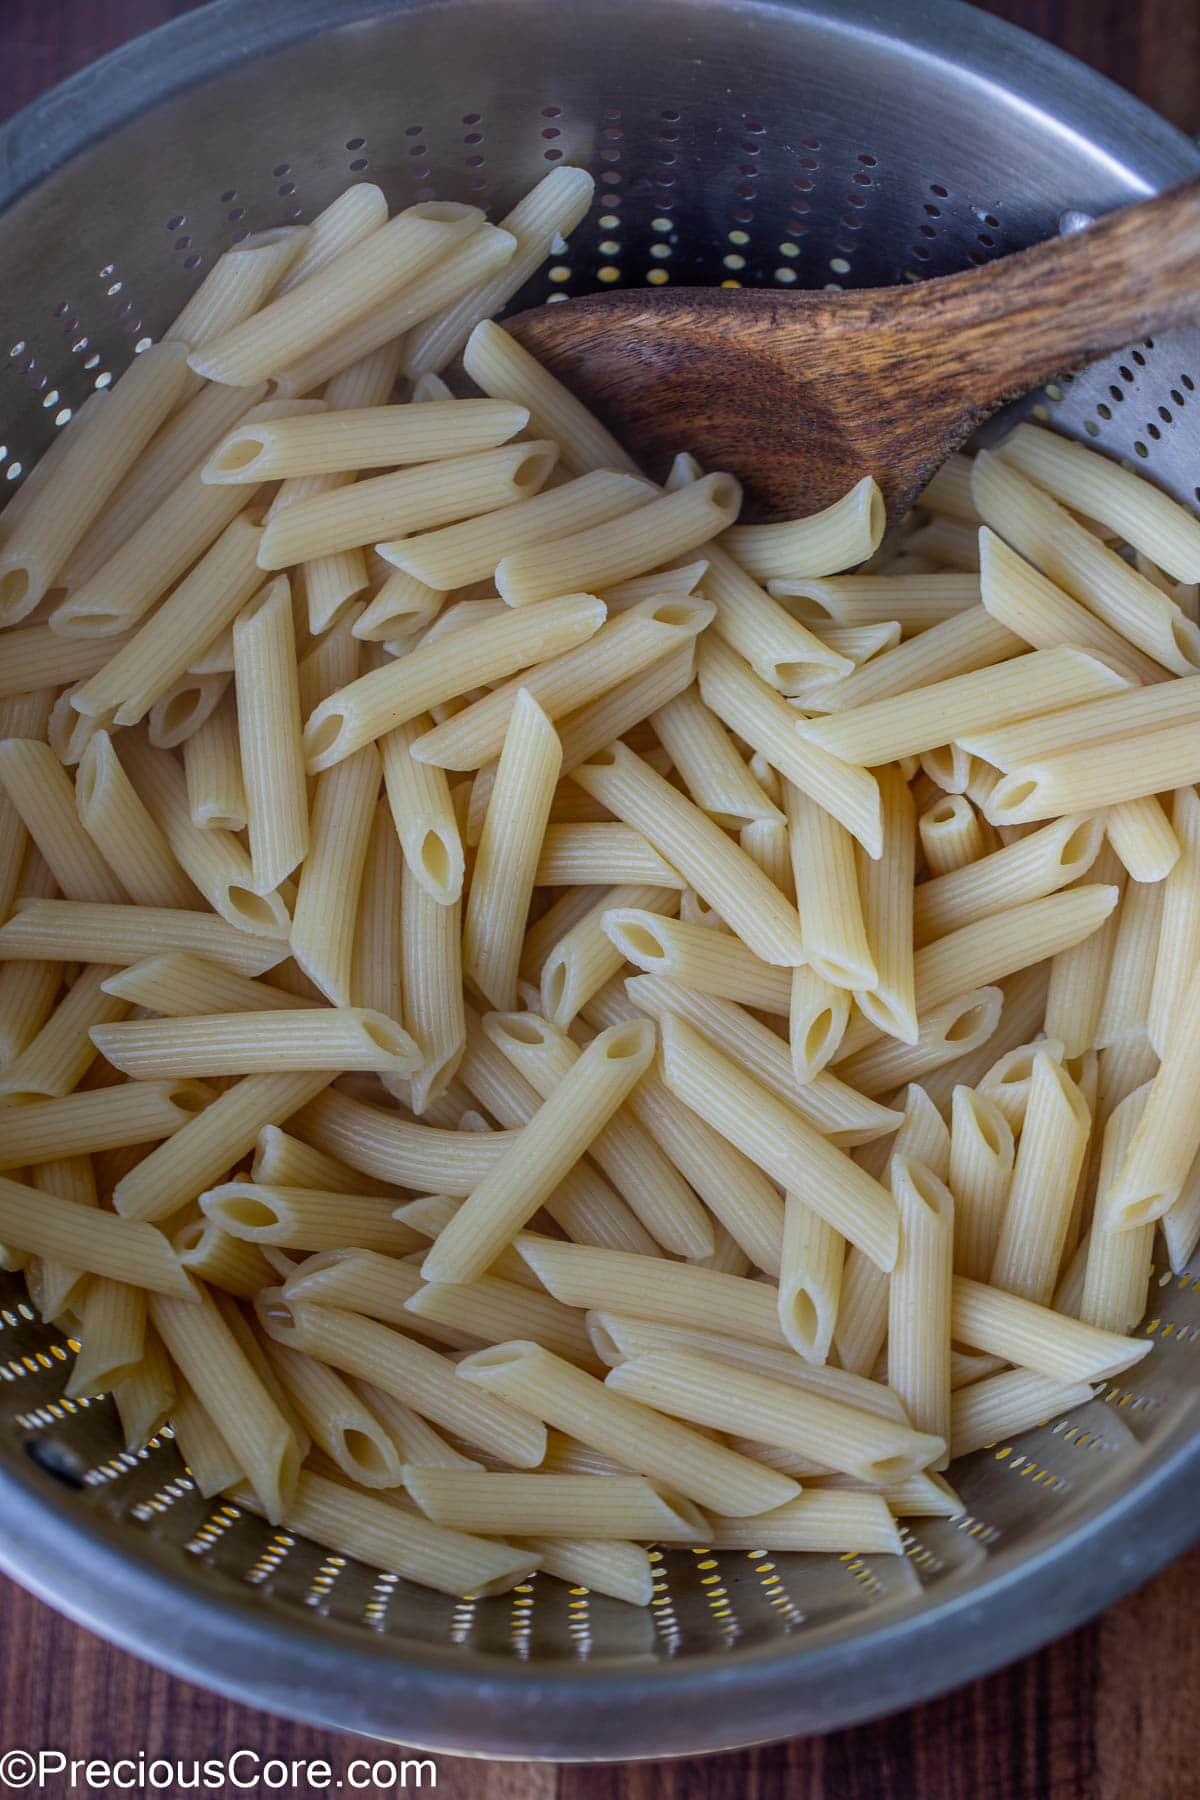 Drained cooked pasta in a stainless steel colander.